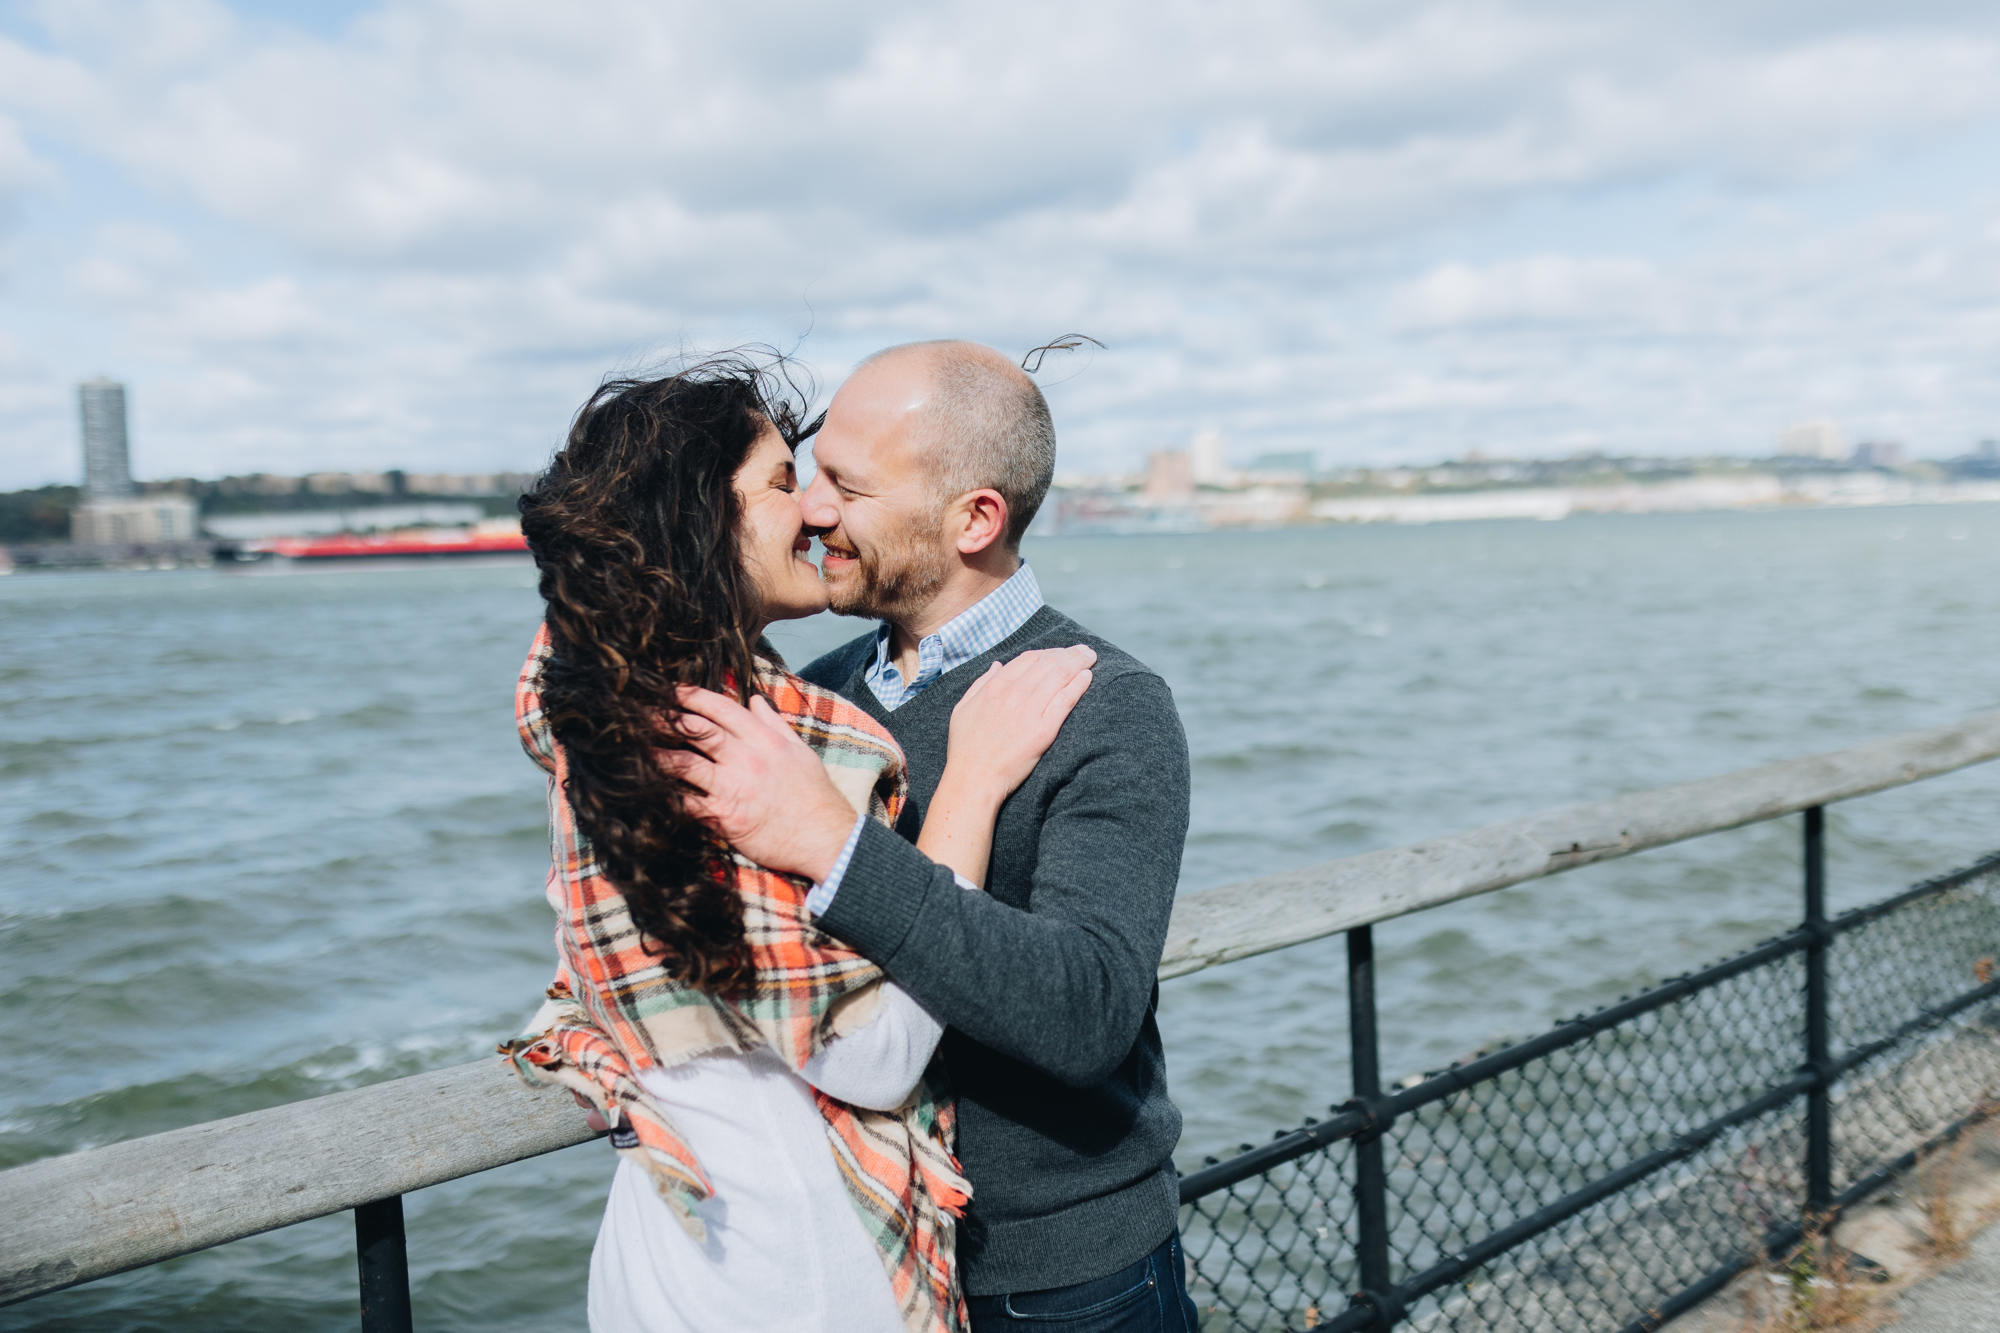 Lively Fall Riverside Park Engagement Photography